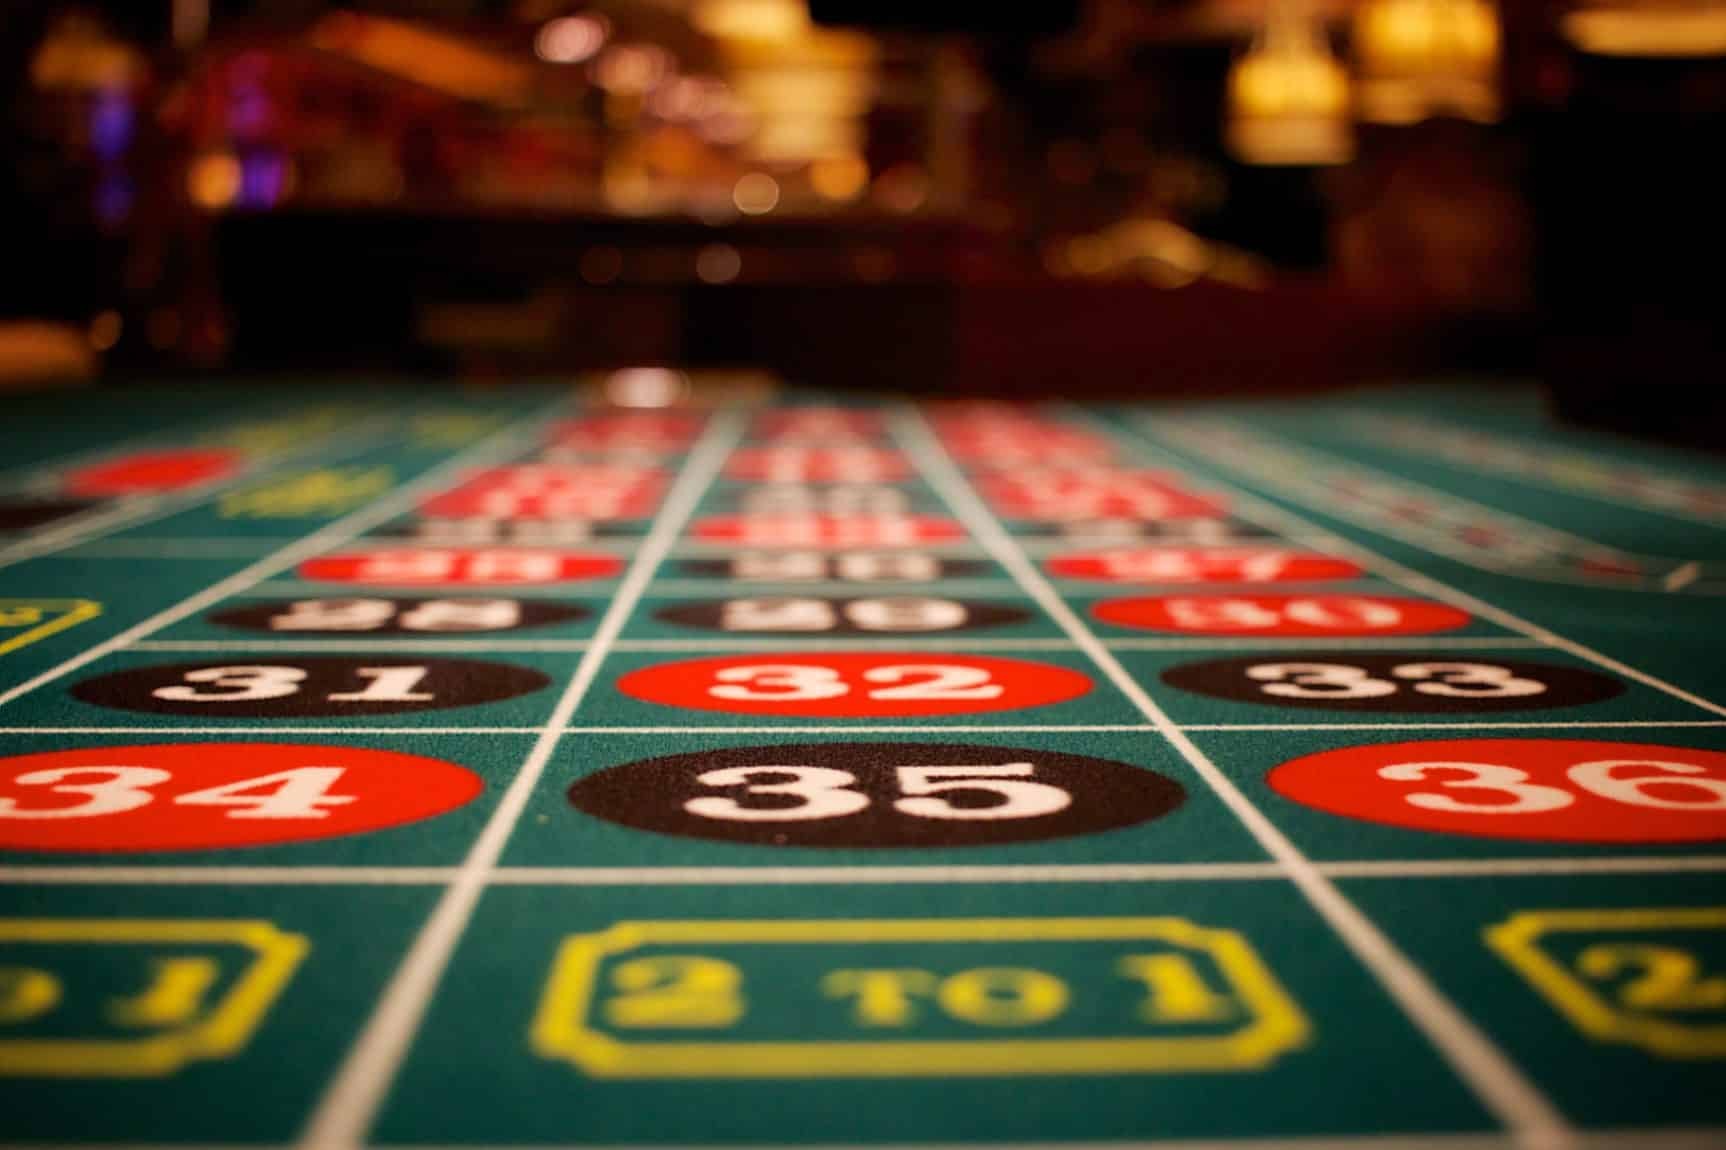 Are there tools to help me manage my gambling habits?